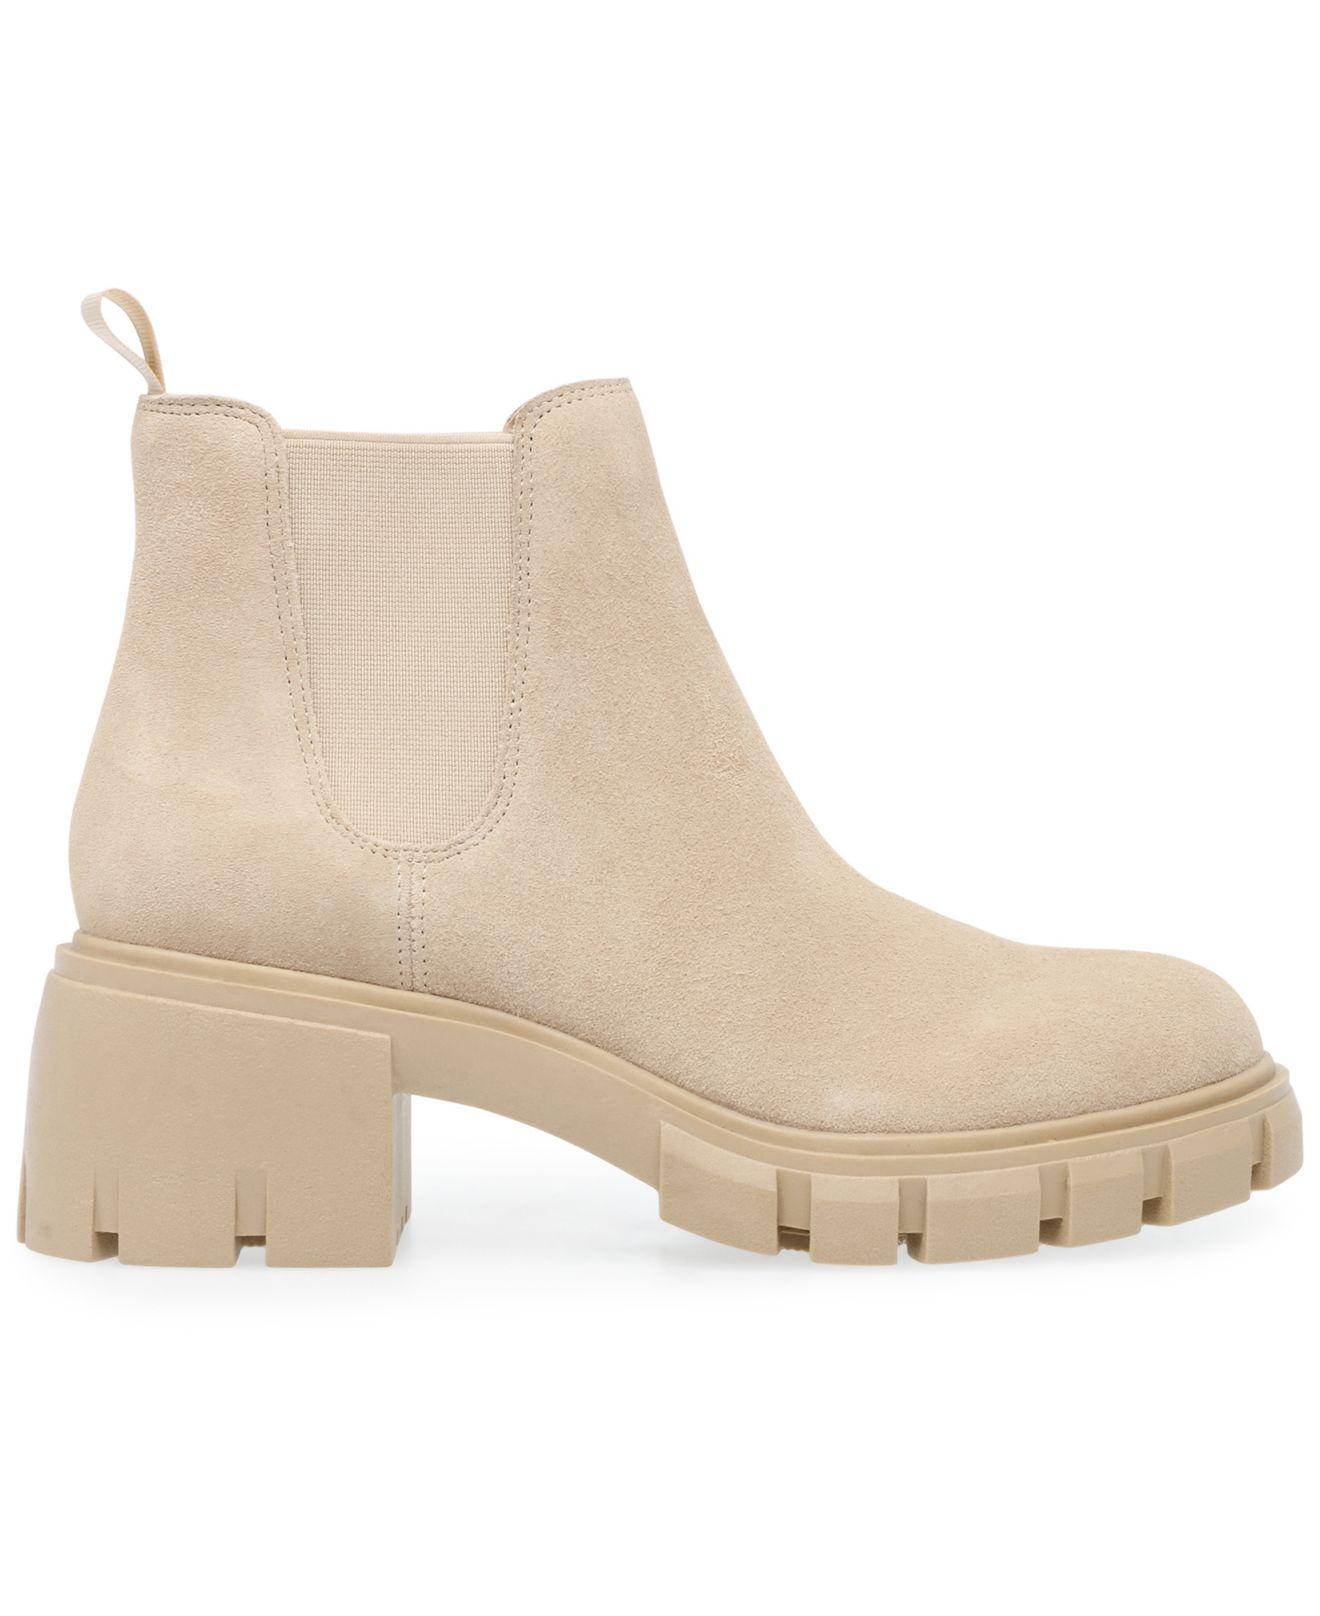 Steve Madden Howler Lug Sole Chelsea Booties in Natural | Lyst